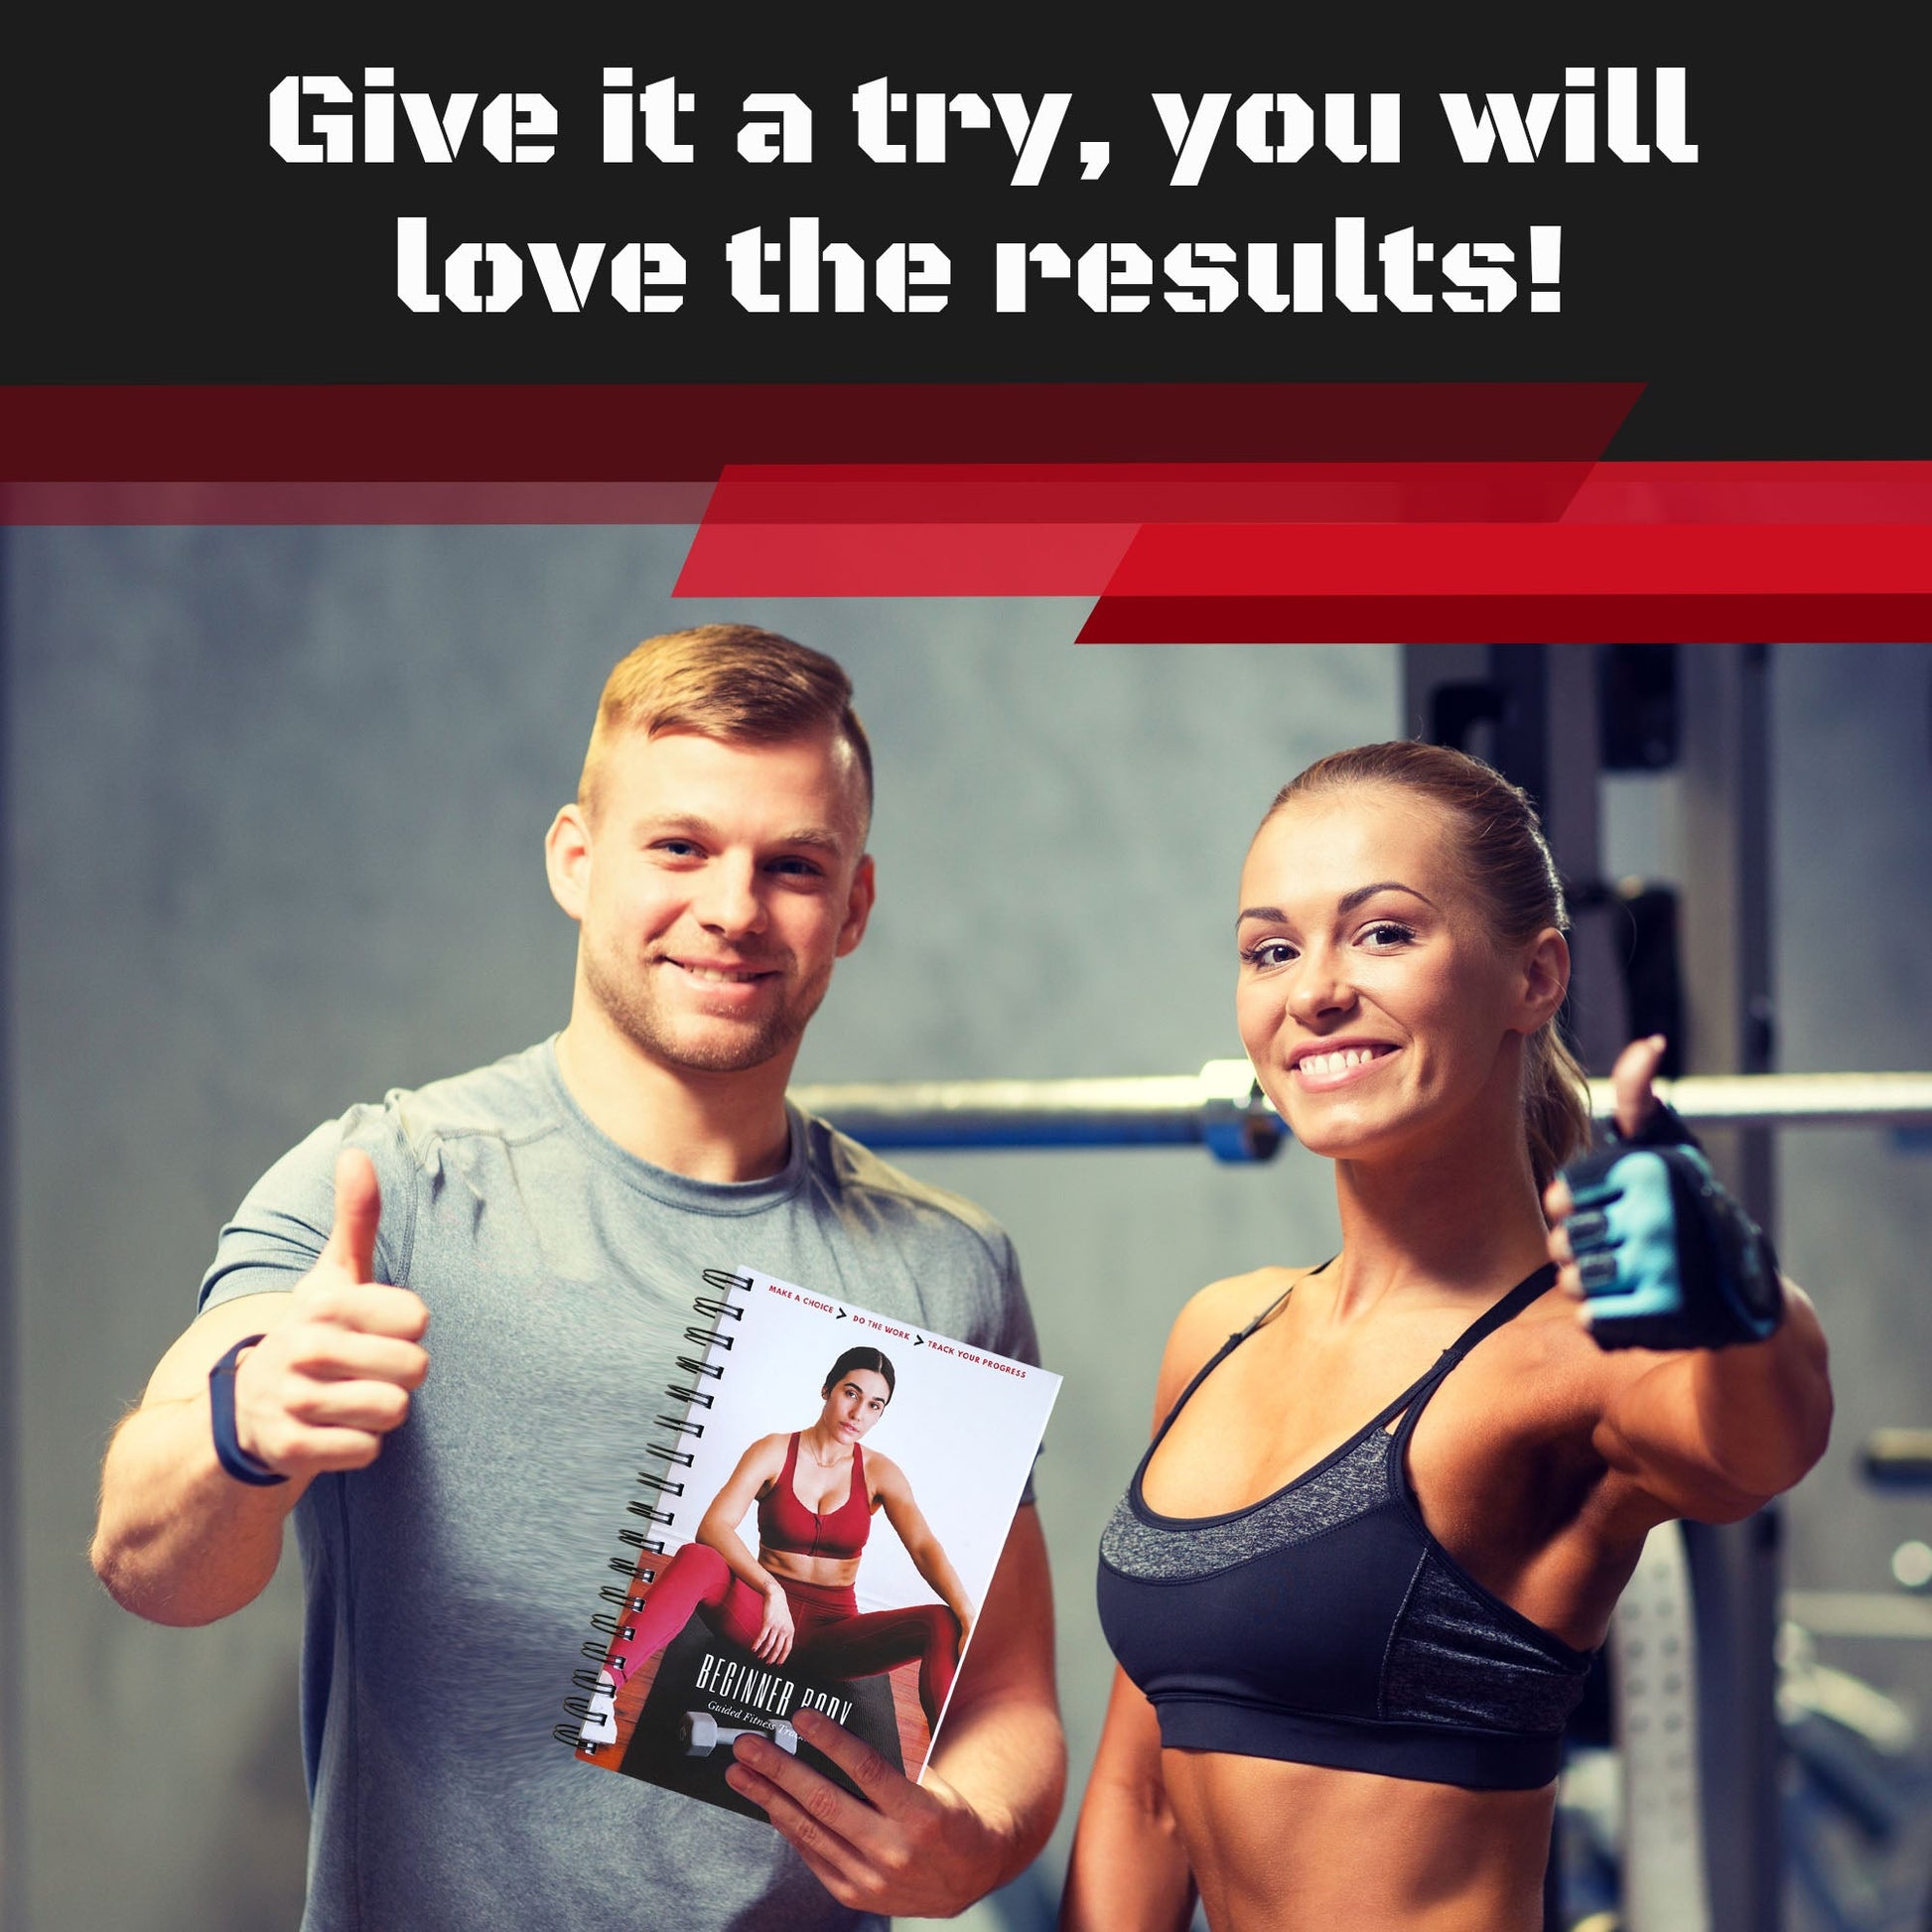 Beginner Body - Guided Fitness Journal For Beginners, 8 Week Step by Step Fitness & Nutrition Planner with Daily Workout Routines Provided carabellariazzo.com 